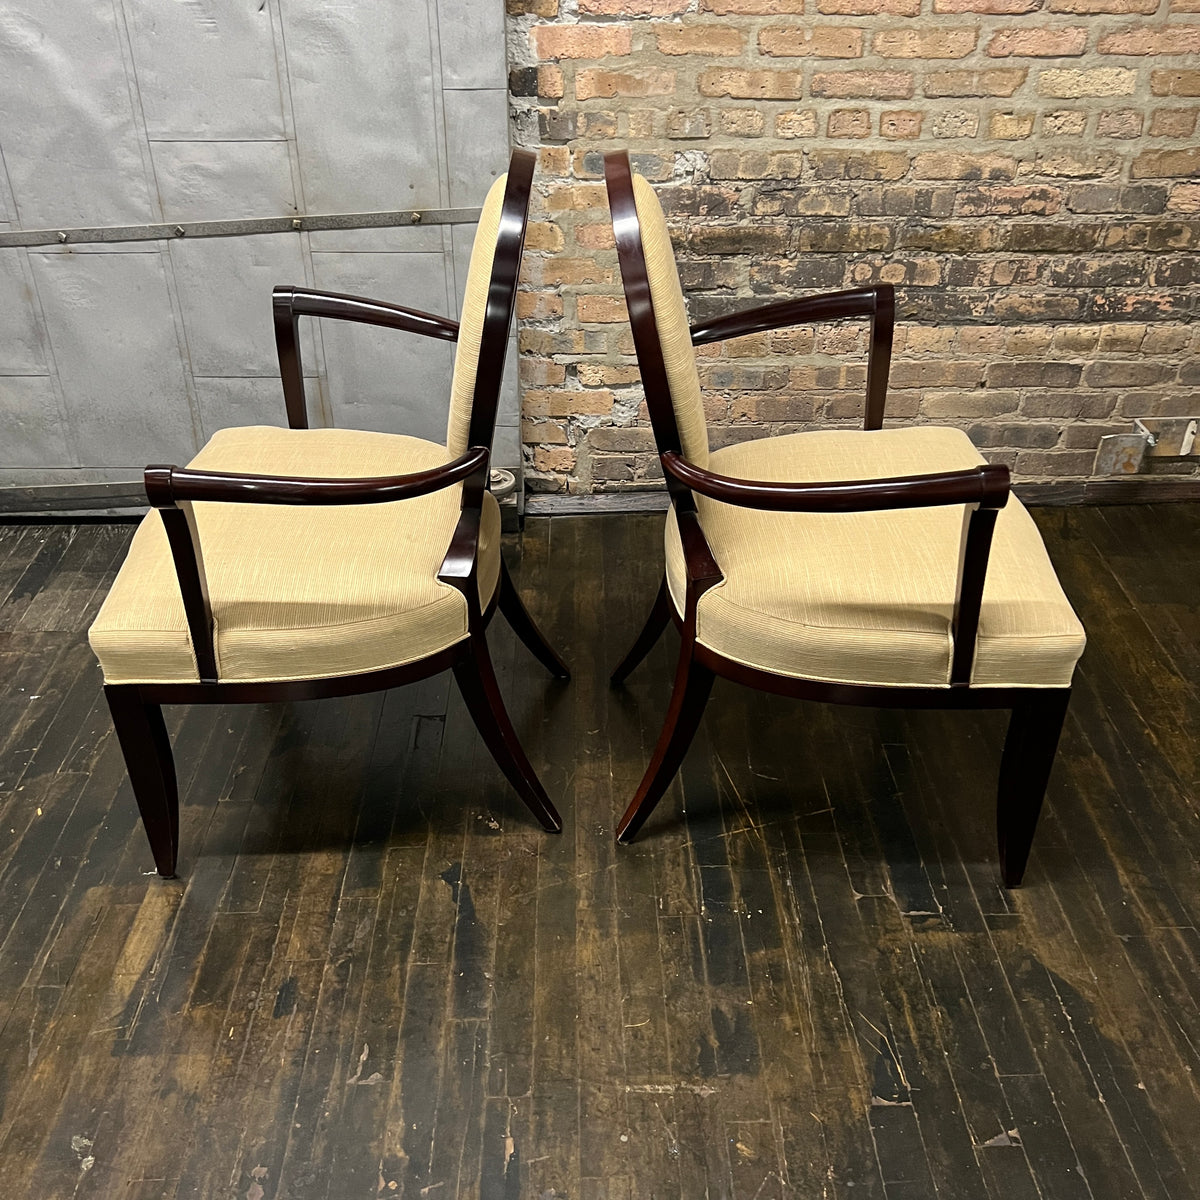 A set of 2 X back dining chairs with arms designed by Barbara Barry for Baker. These chairs are still in production today (and sell for between $3K - $4K per chair). Chicago, IL Studio Sonja Milan